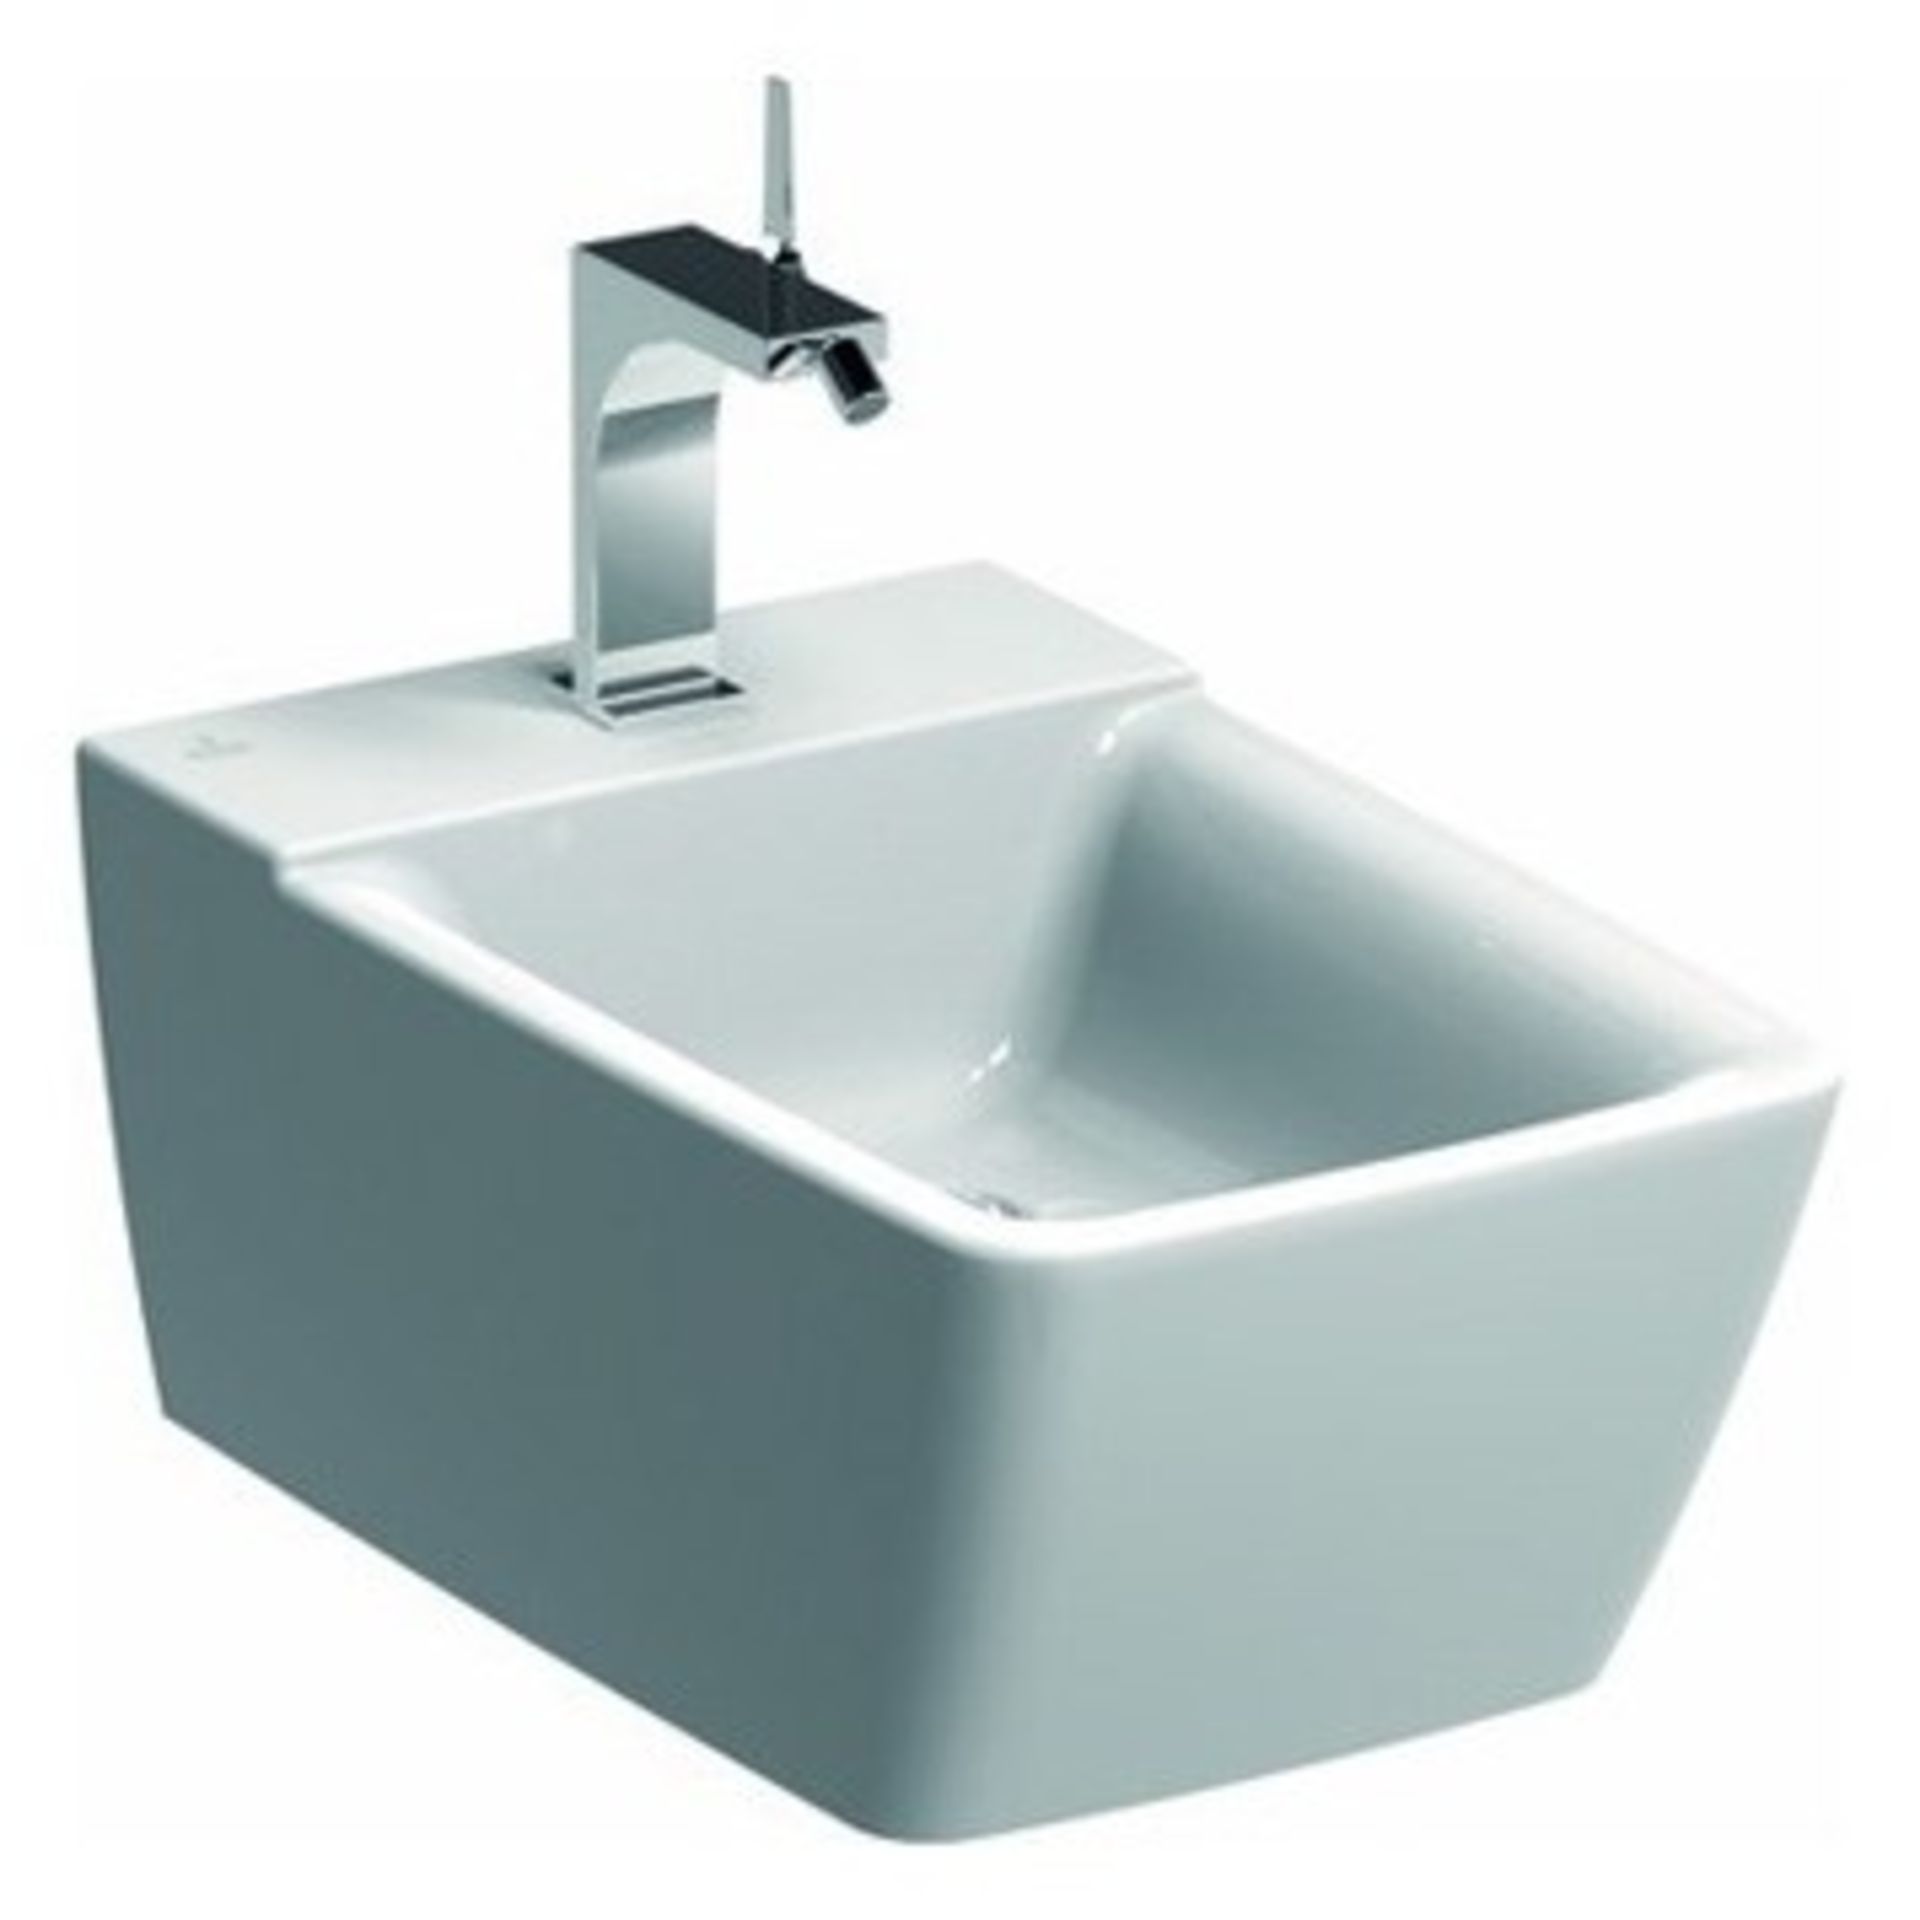 (XL162) Xeno 540mm Bidet Wall Hung. RRP £389.99. A premium bathroom series of products with ...( - Image 2 of 2